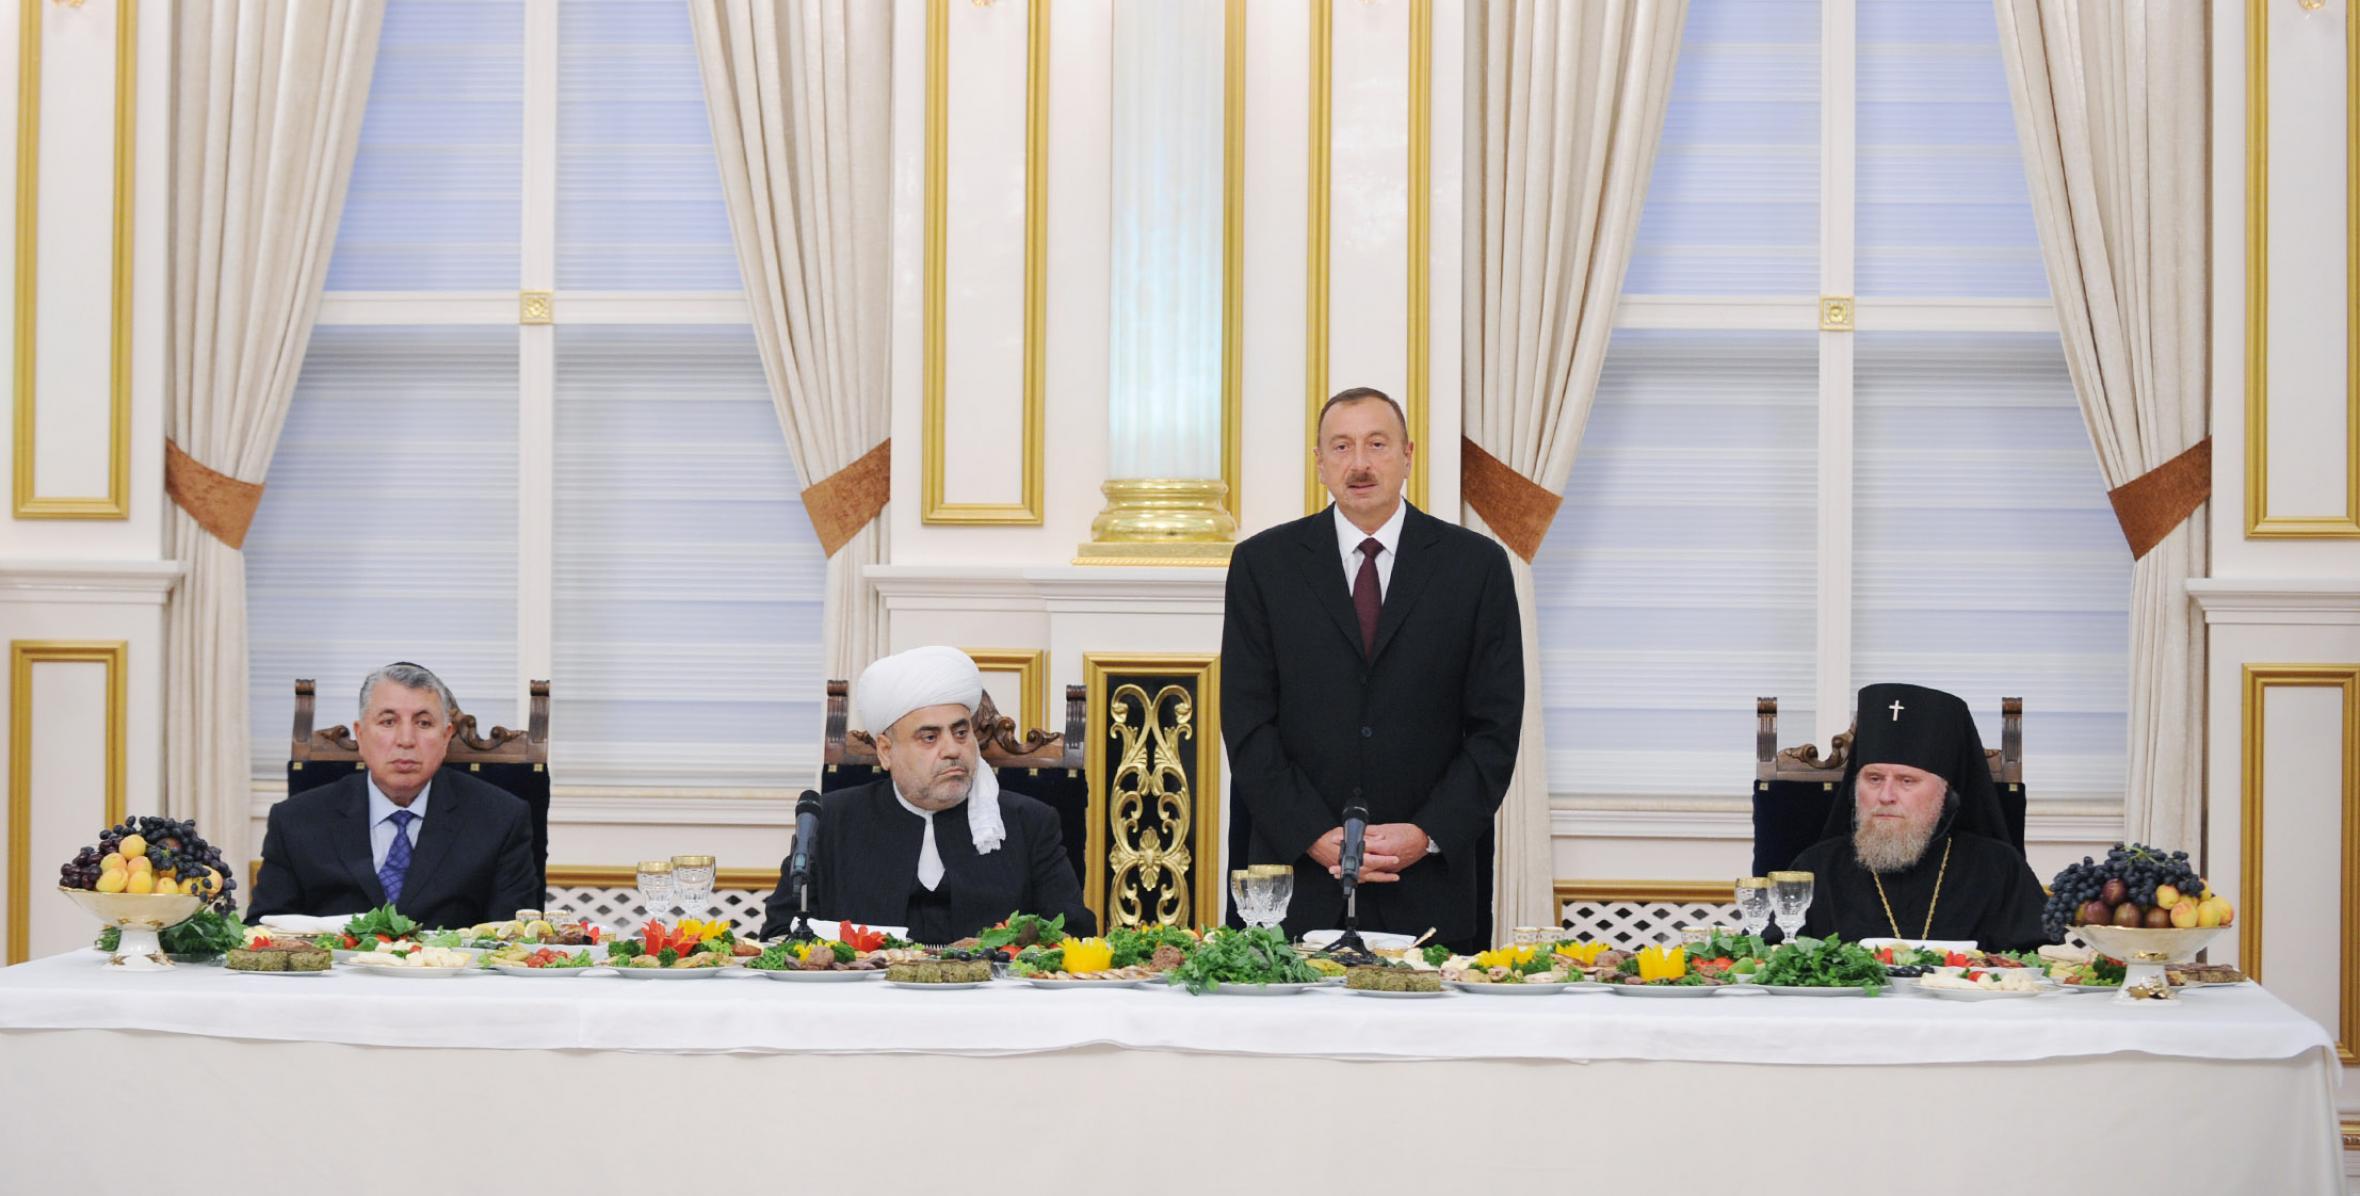 Speech by Ilham Aliyev at the Iftar ceremony on the occasion of the holy month of Ramadan